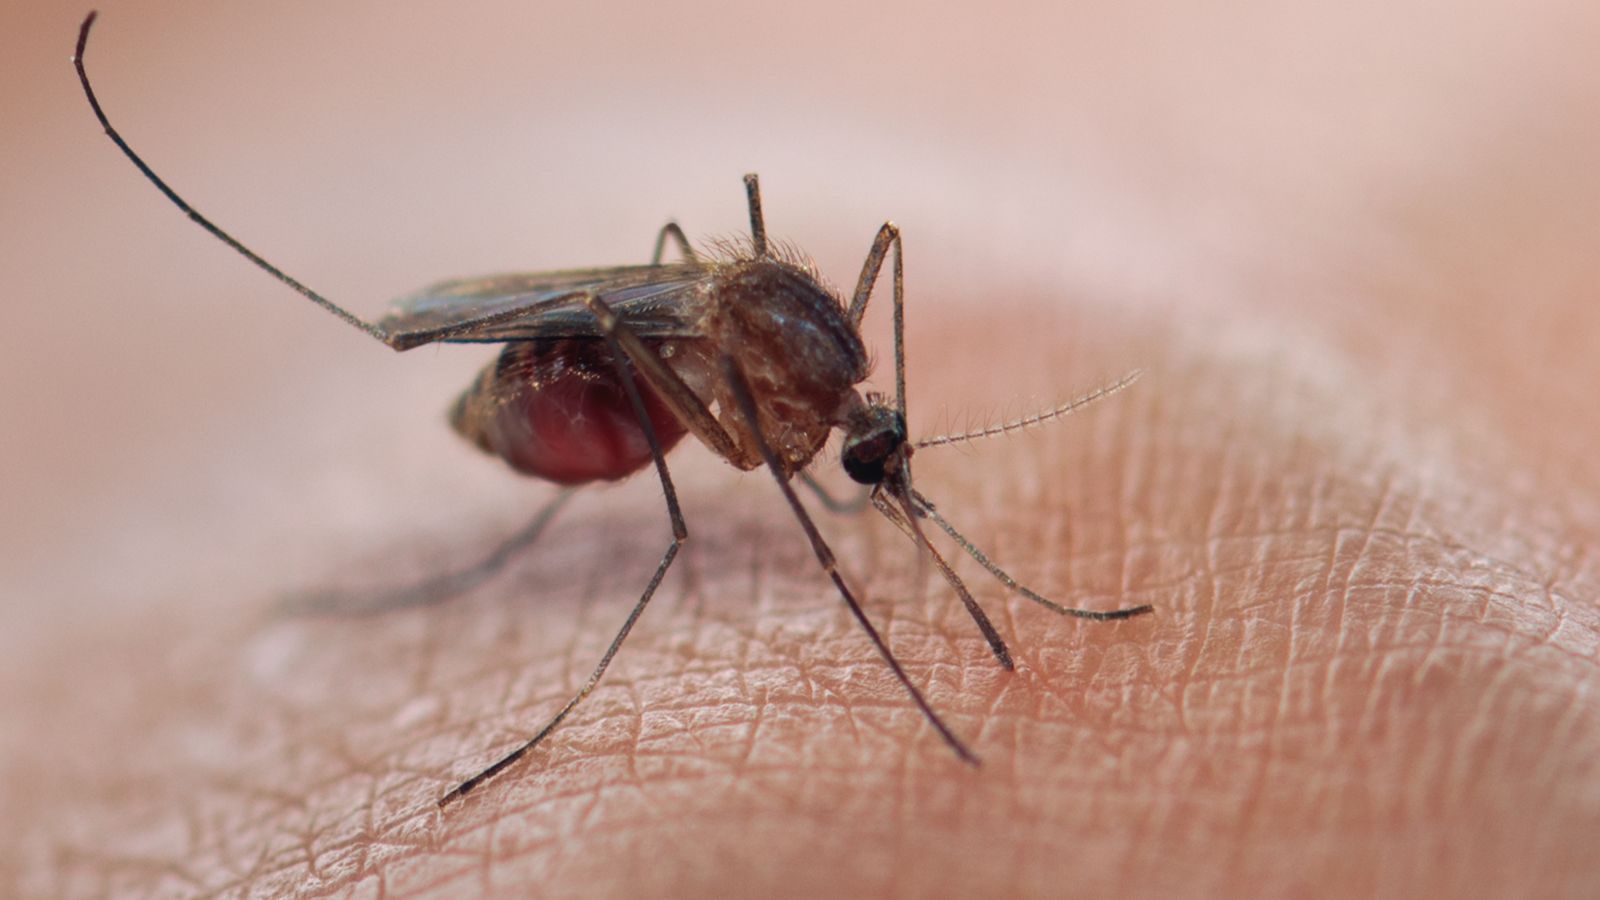 BioNTech using COVID jab technology to develop effective malaria vaccine